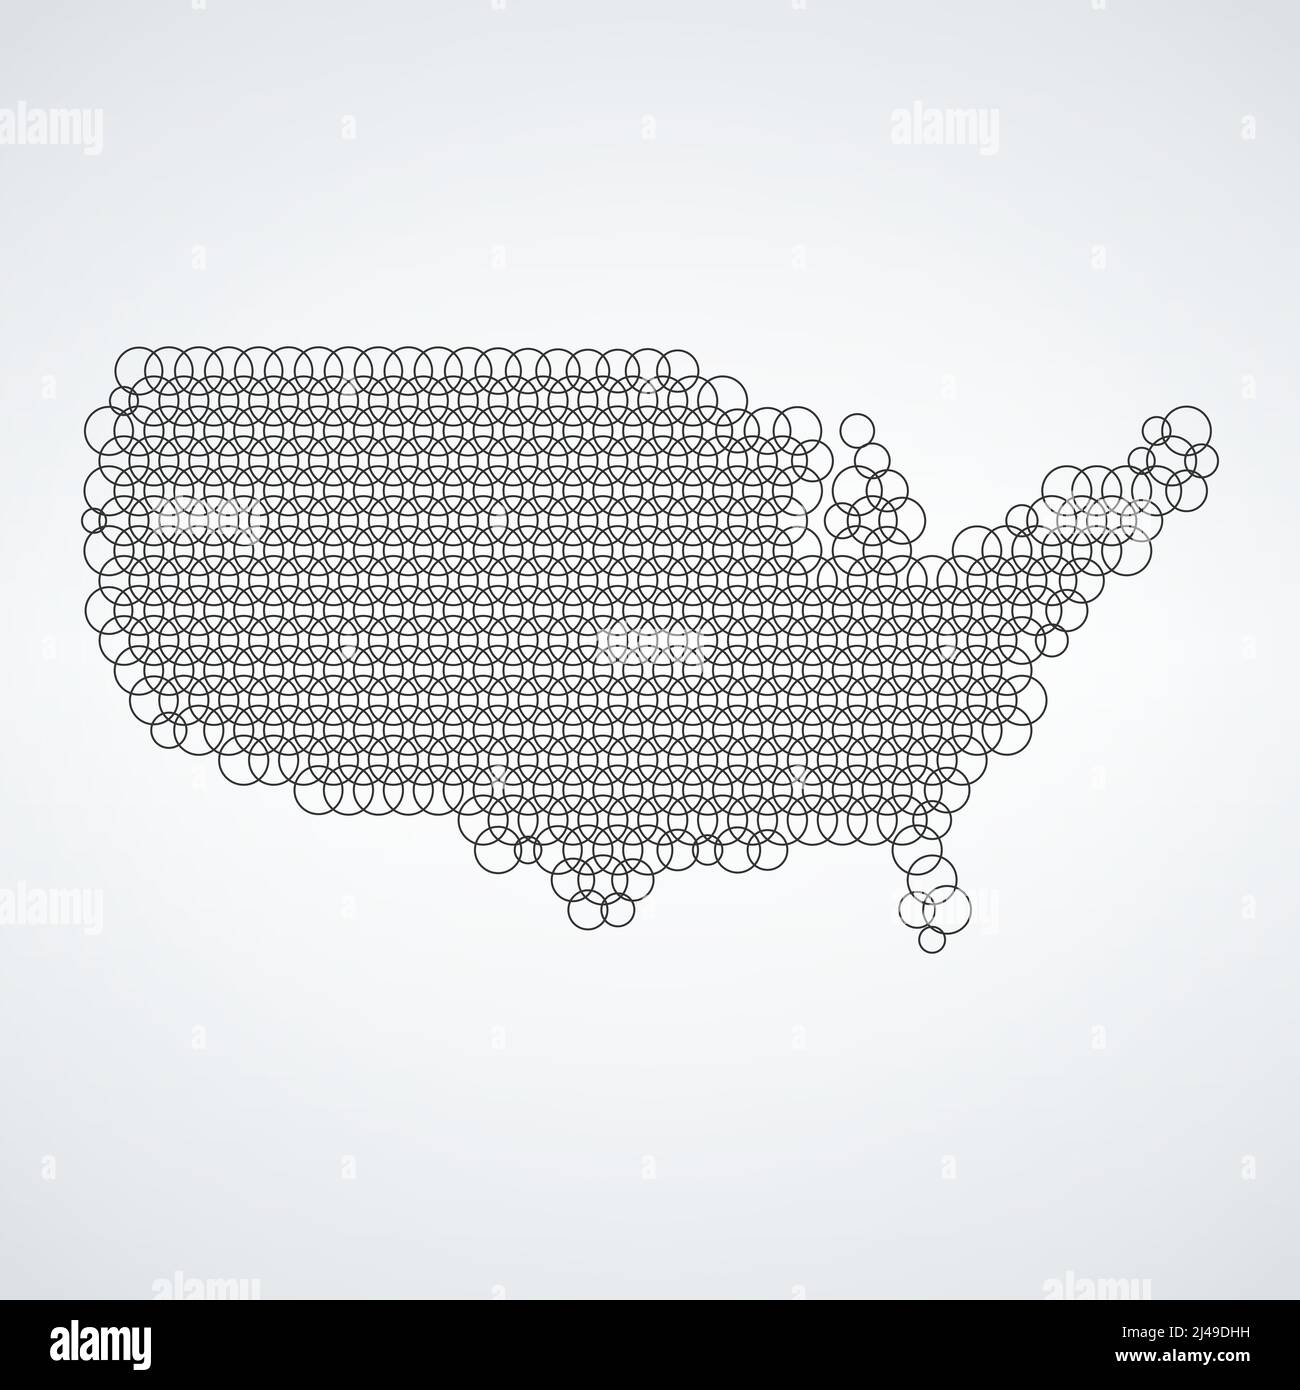 USA circle map. Concept for networking, technology and connections. America made out of circles. Stock vector illustration isolated on white Stock Vector